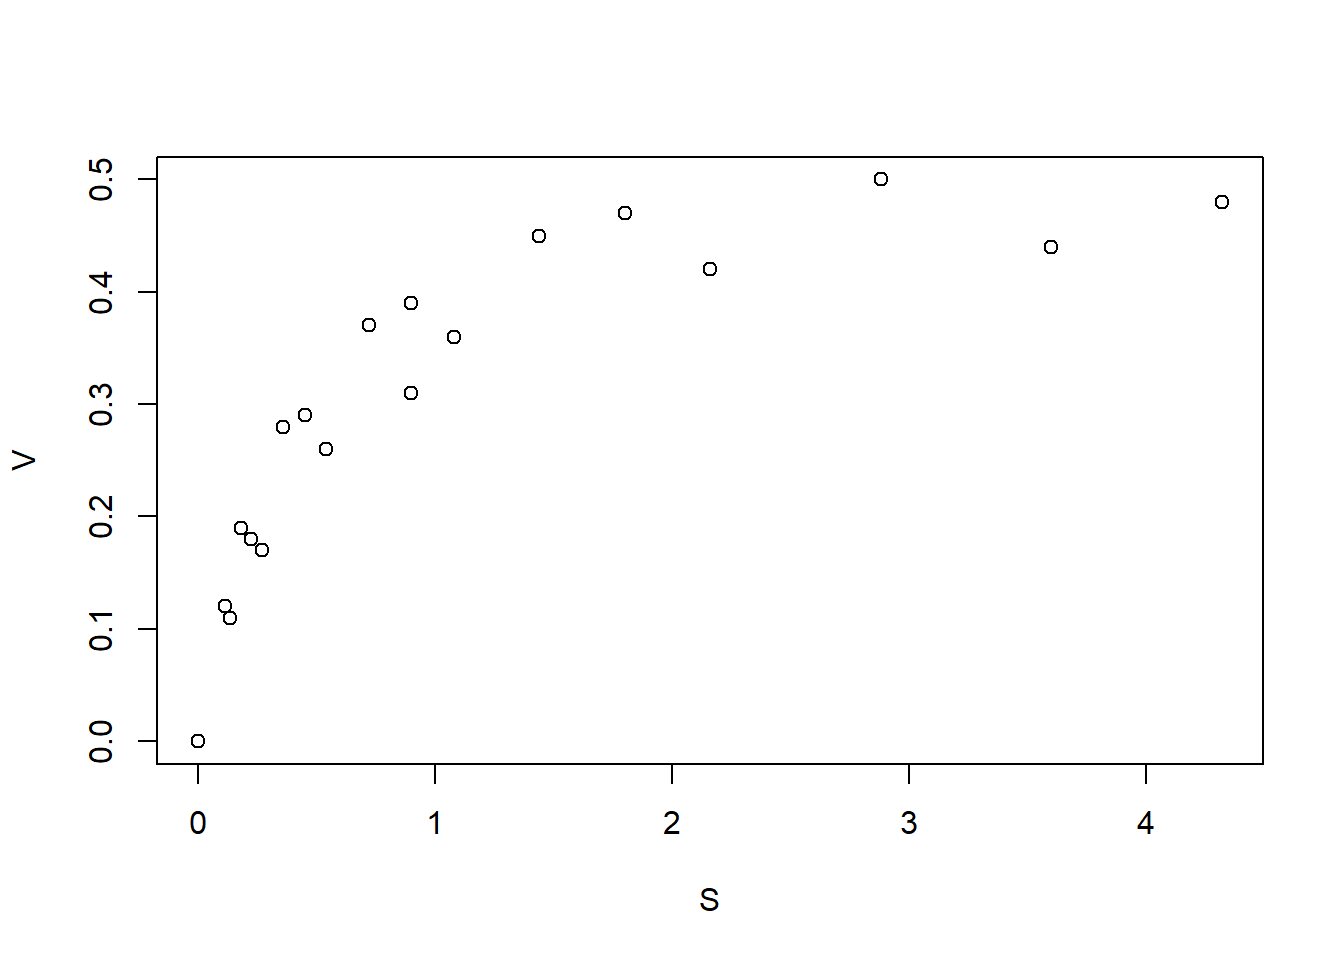 A scatterplot of reaction velocity vs substrate concentration where points follow a similar logarithmic pattern.